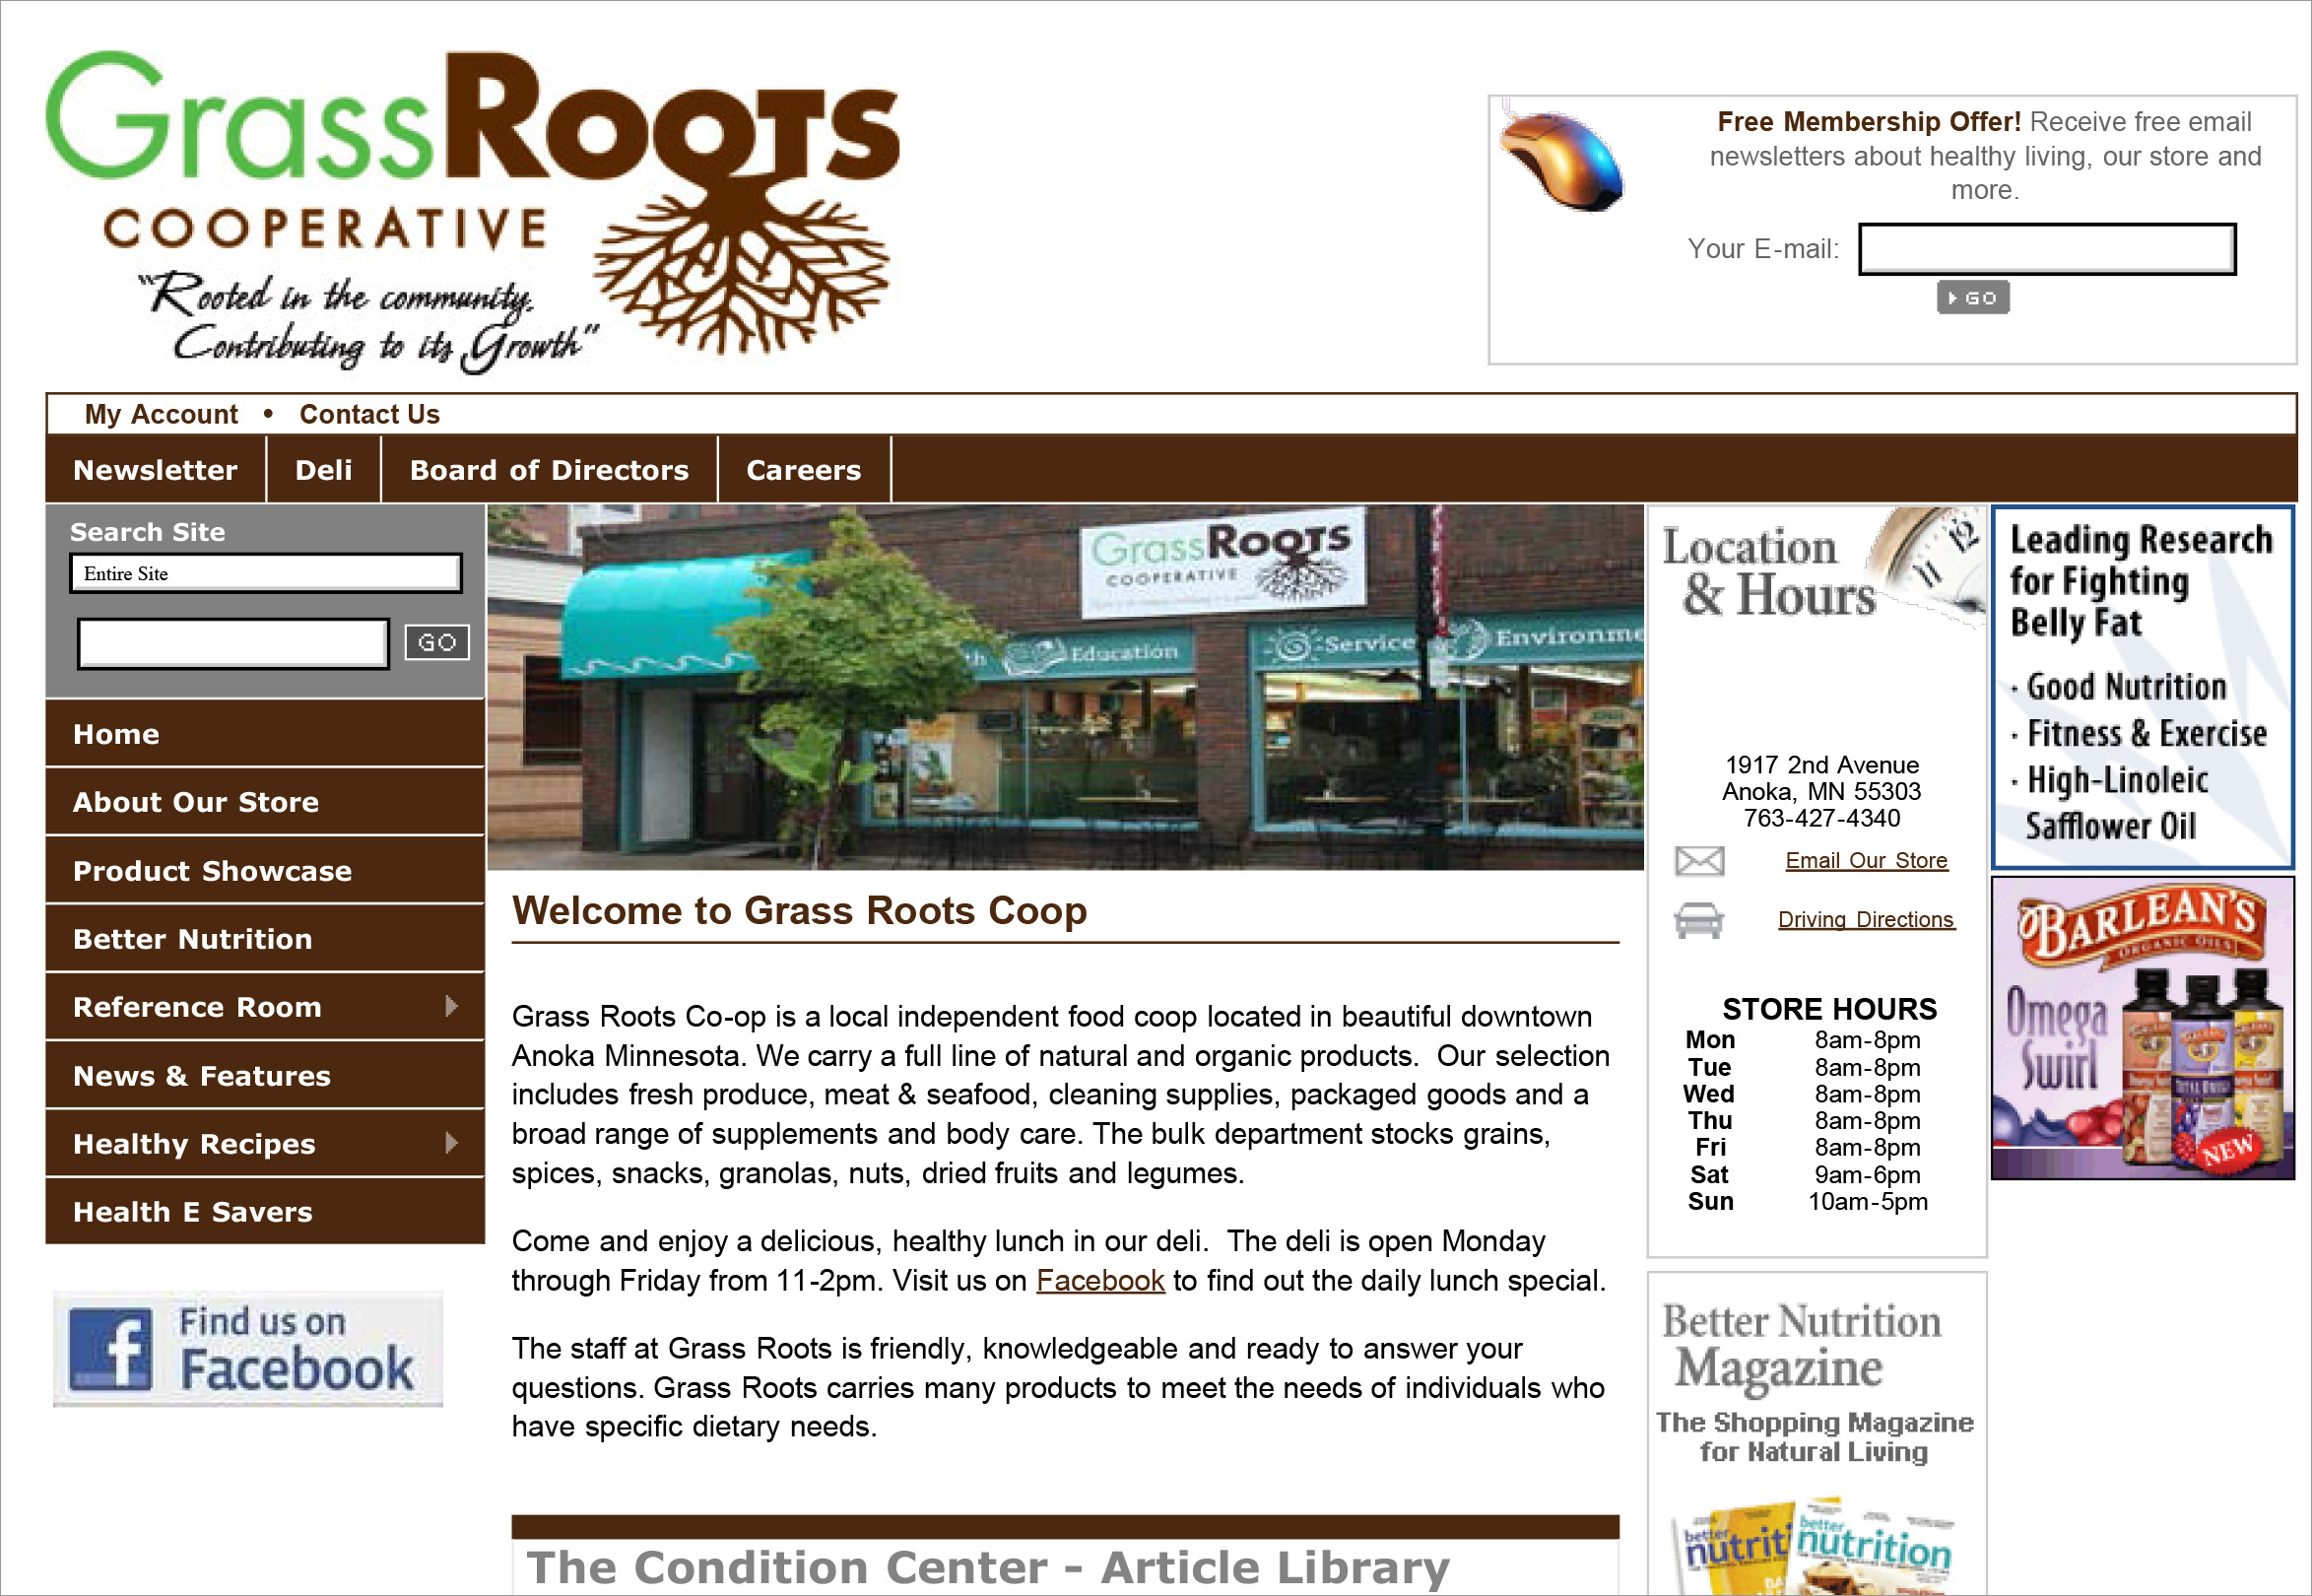 Grass Roots Cooperative